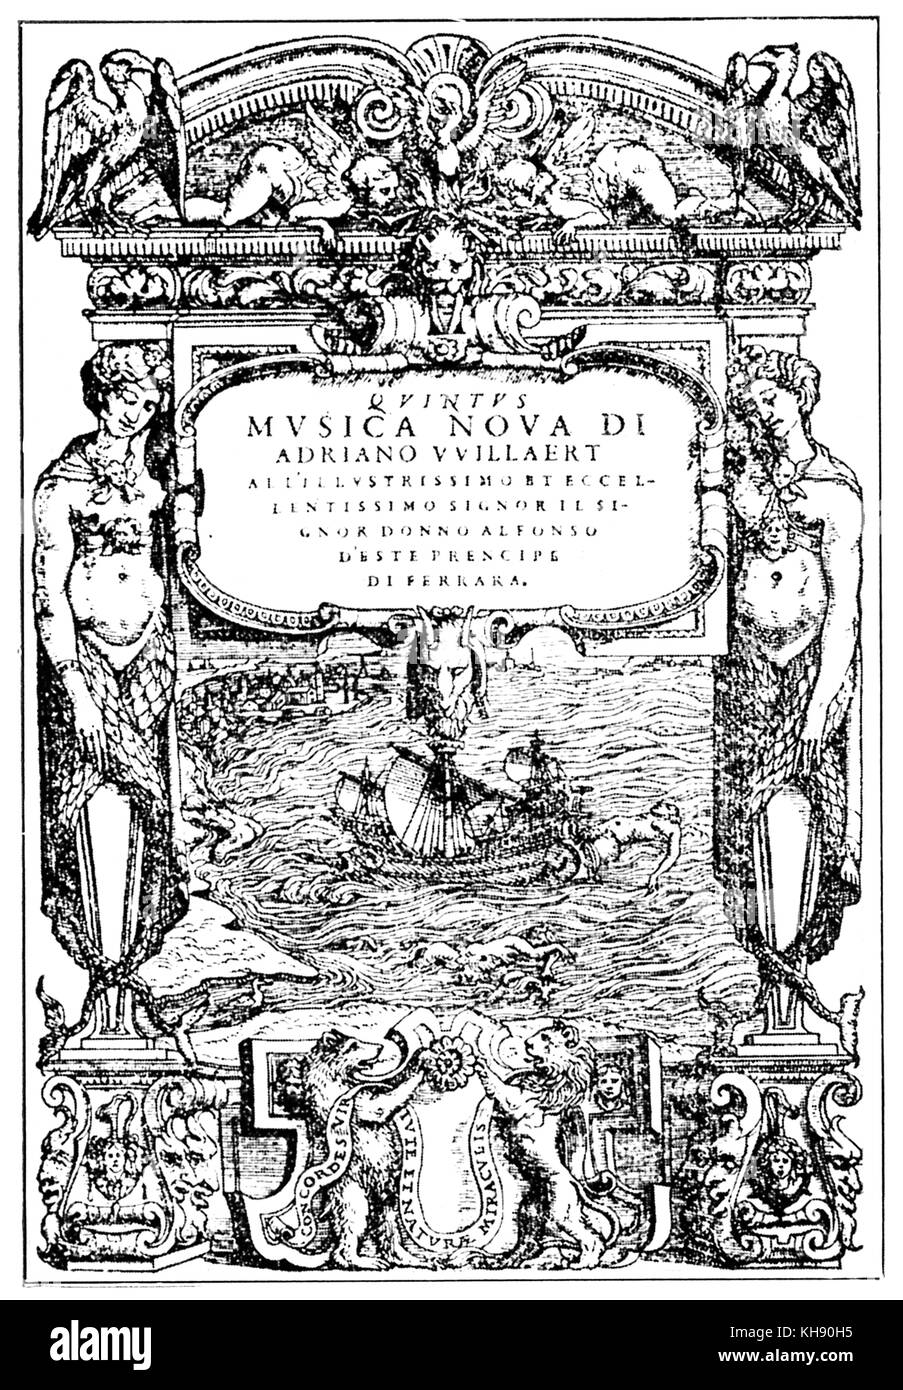 Title-page of the 'Musica nova' by Adrian Willaert (collection of motets and madrigals), Venice, 1559. Stock Photo